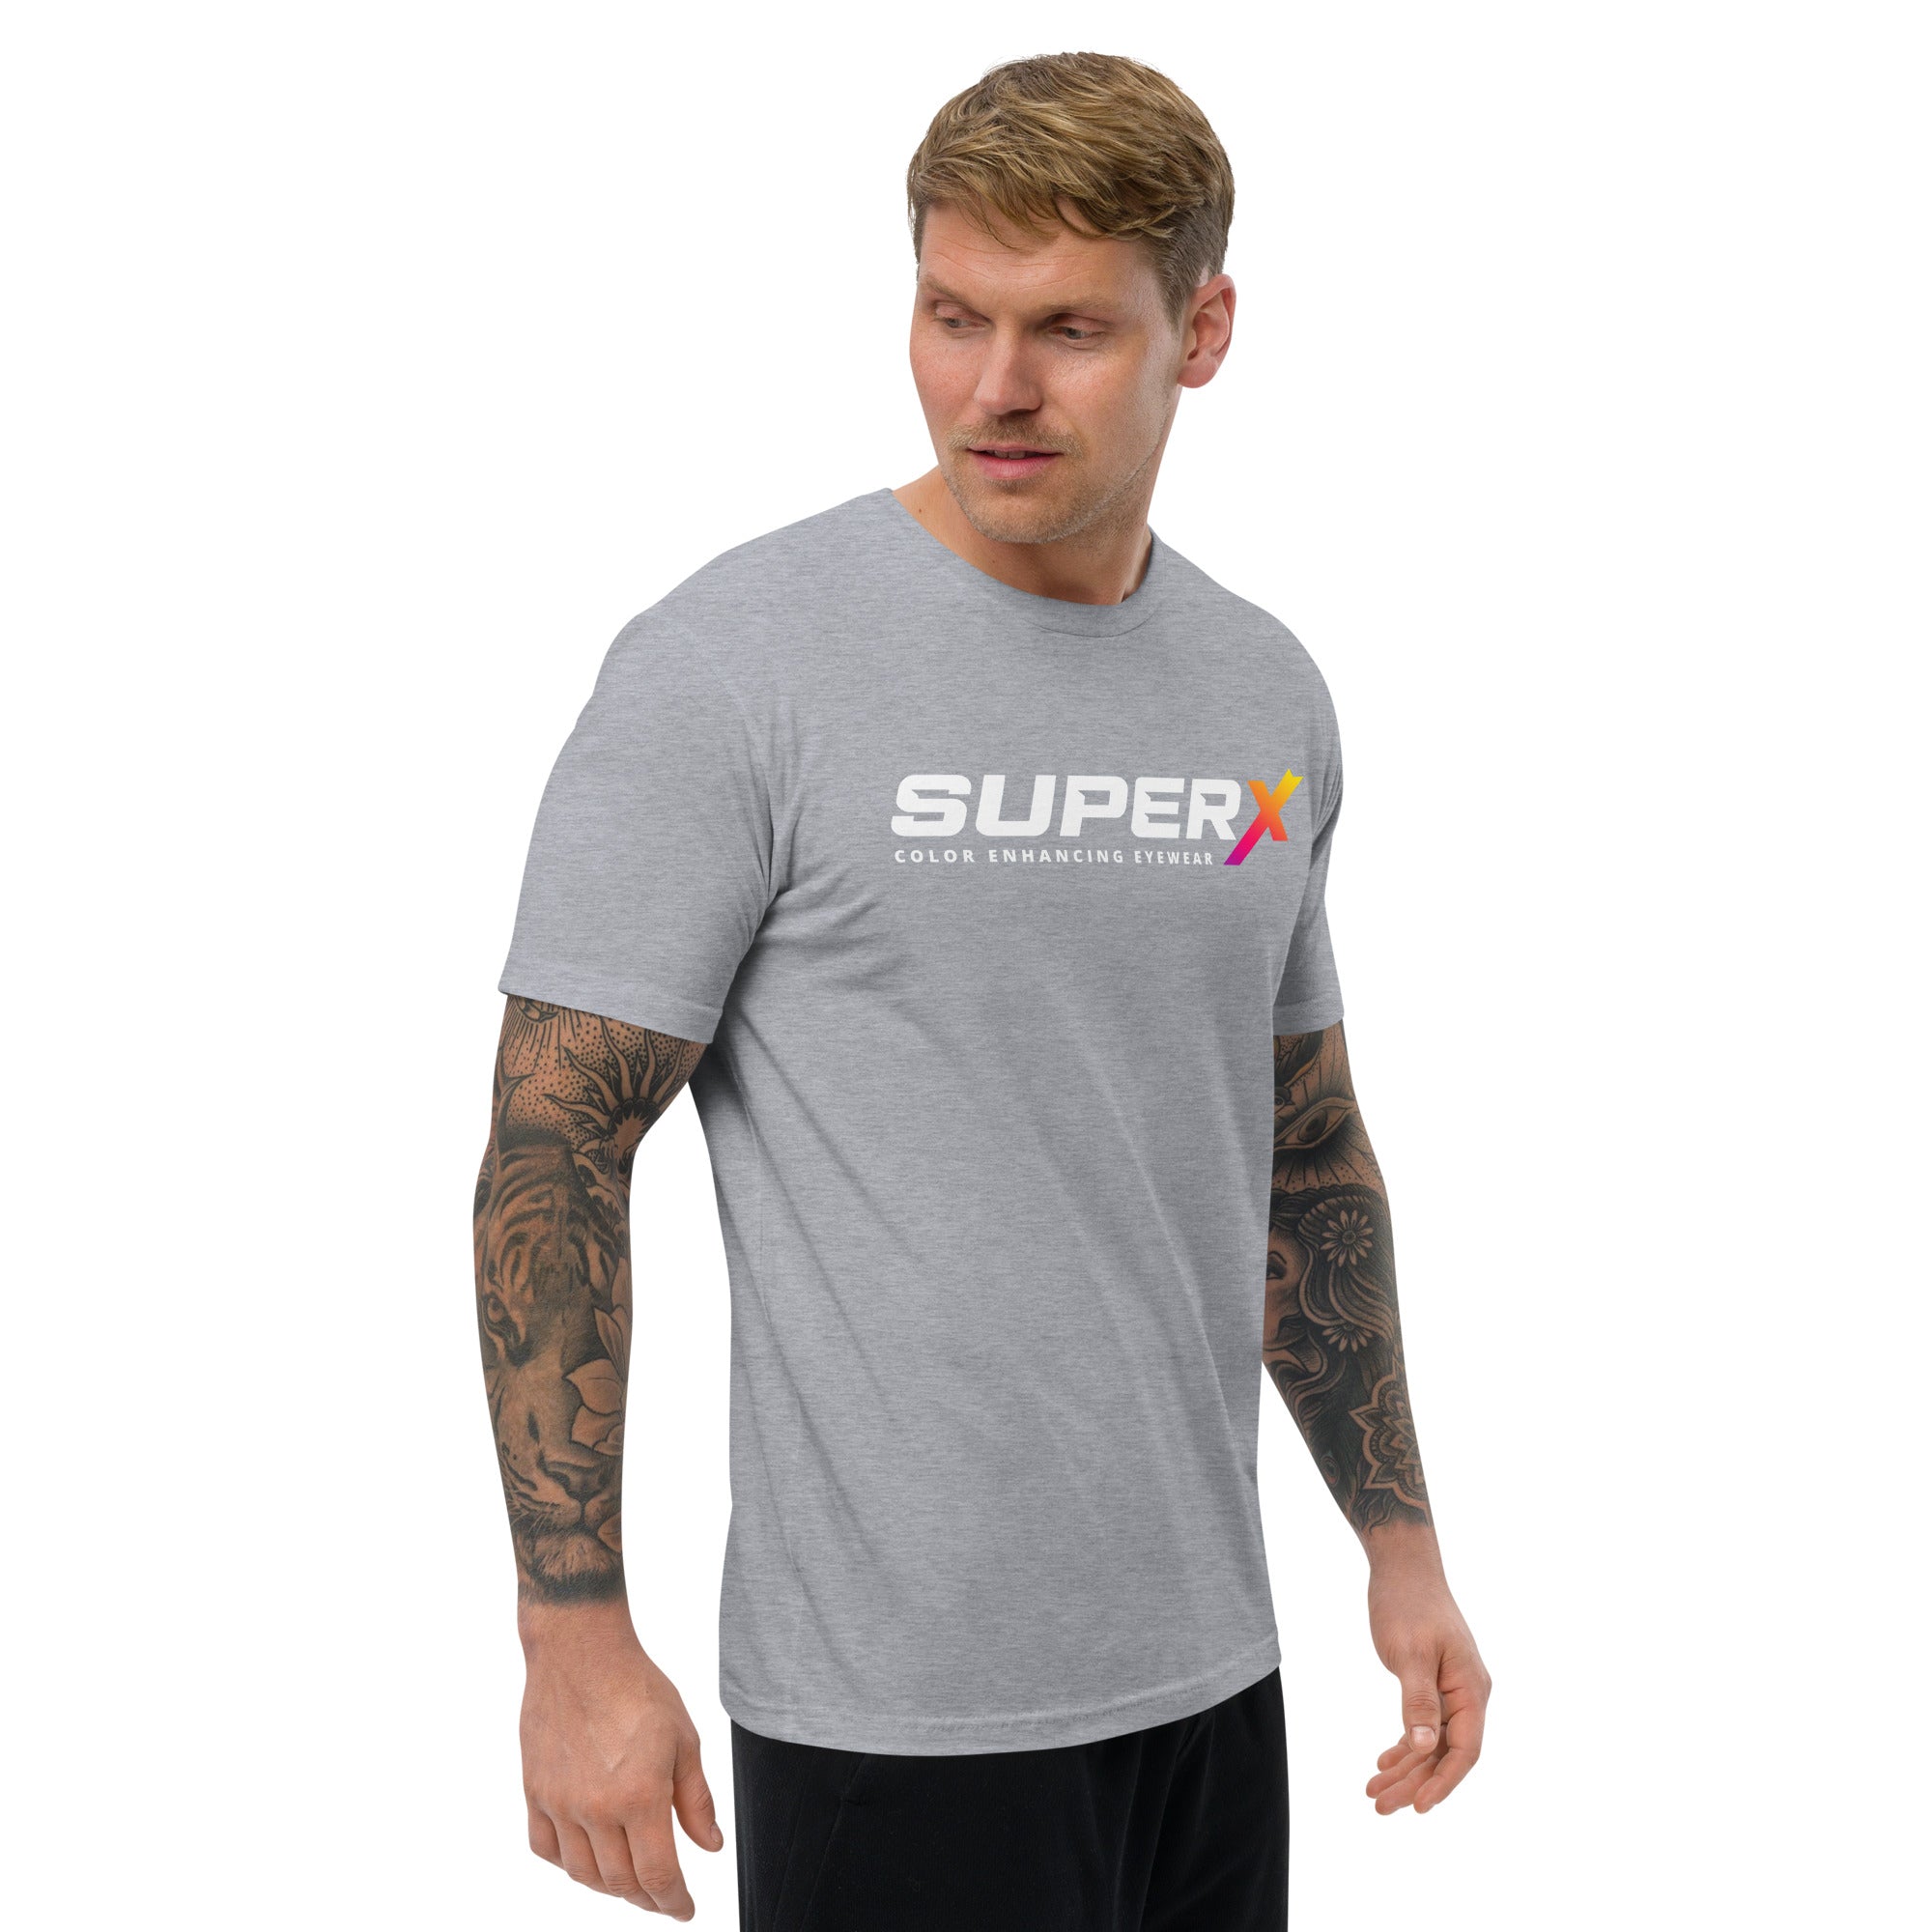 SuperX Men's Fitted T-Shirt